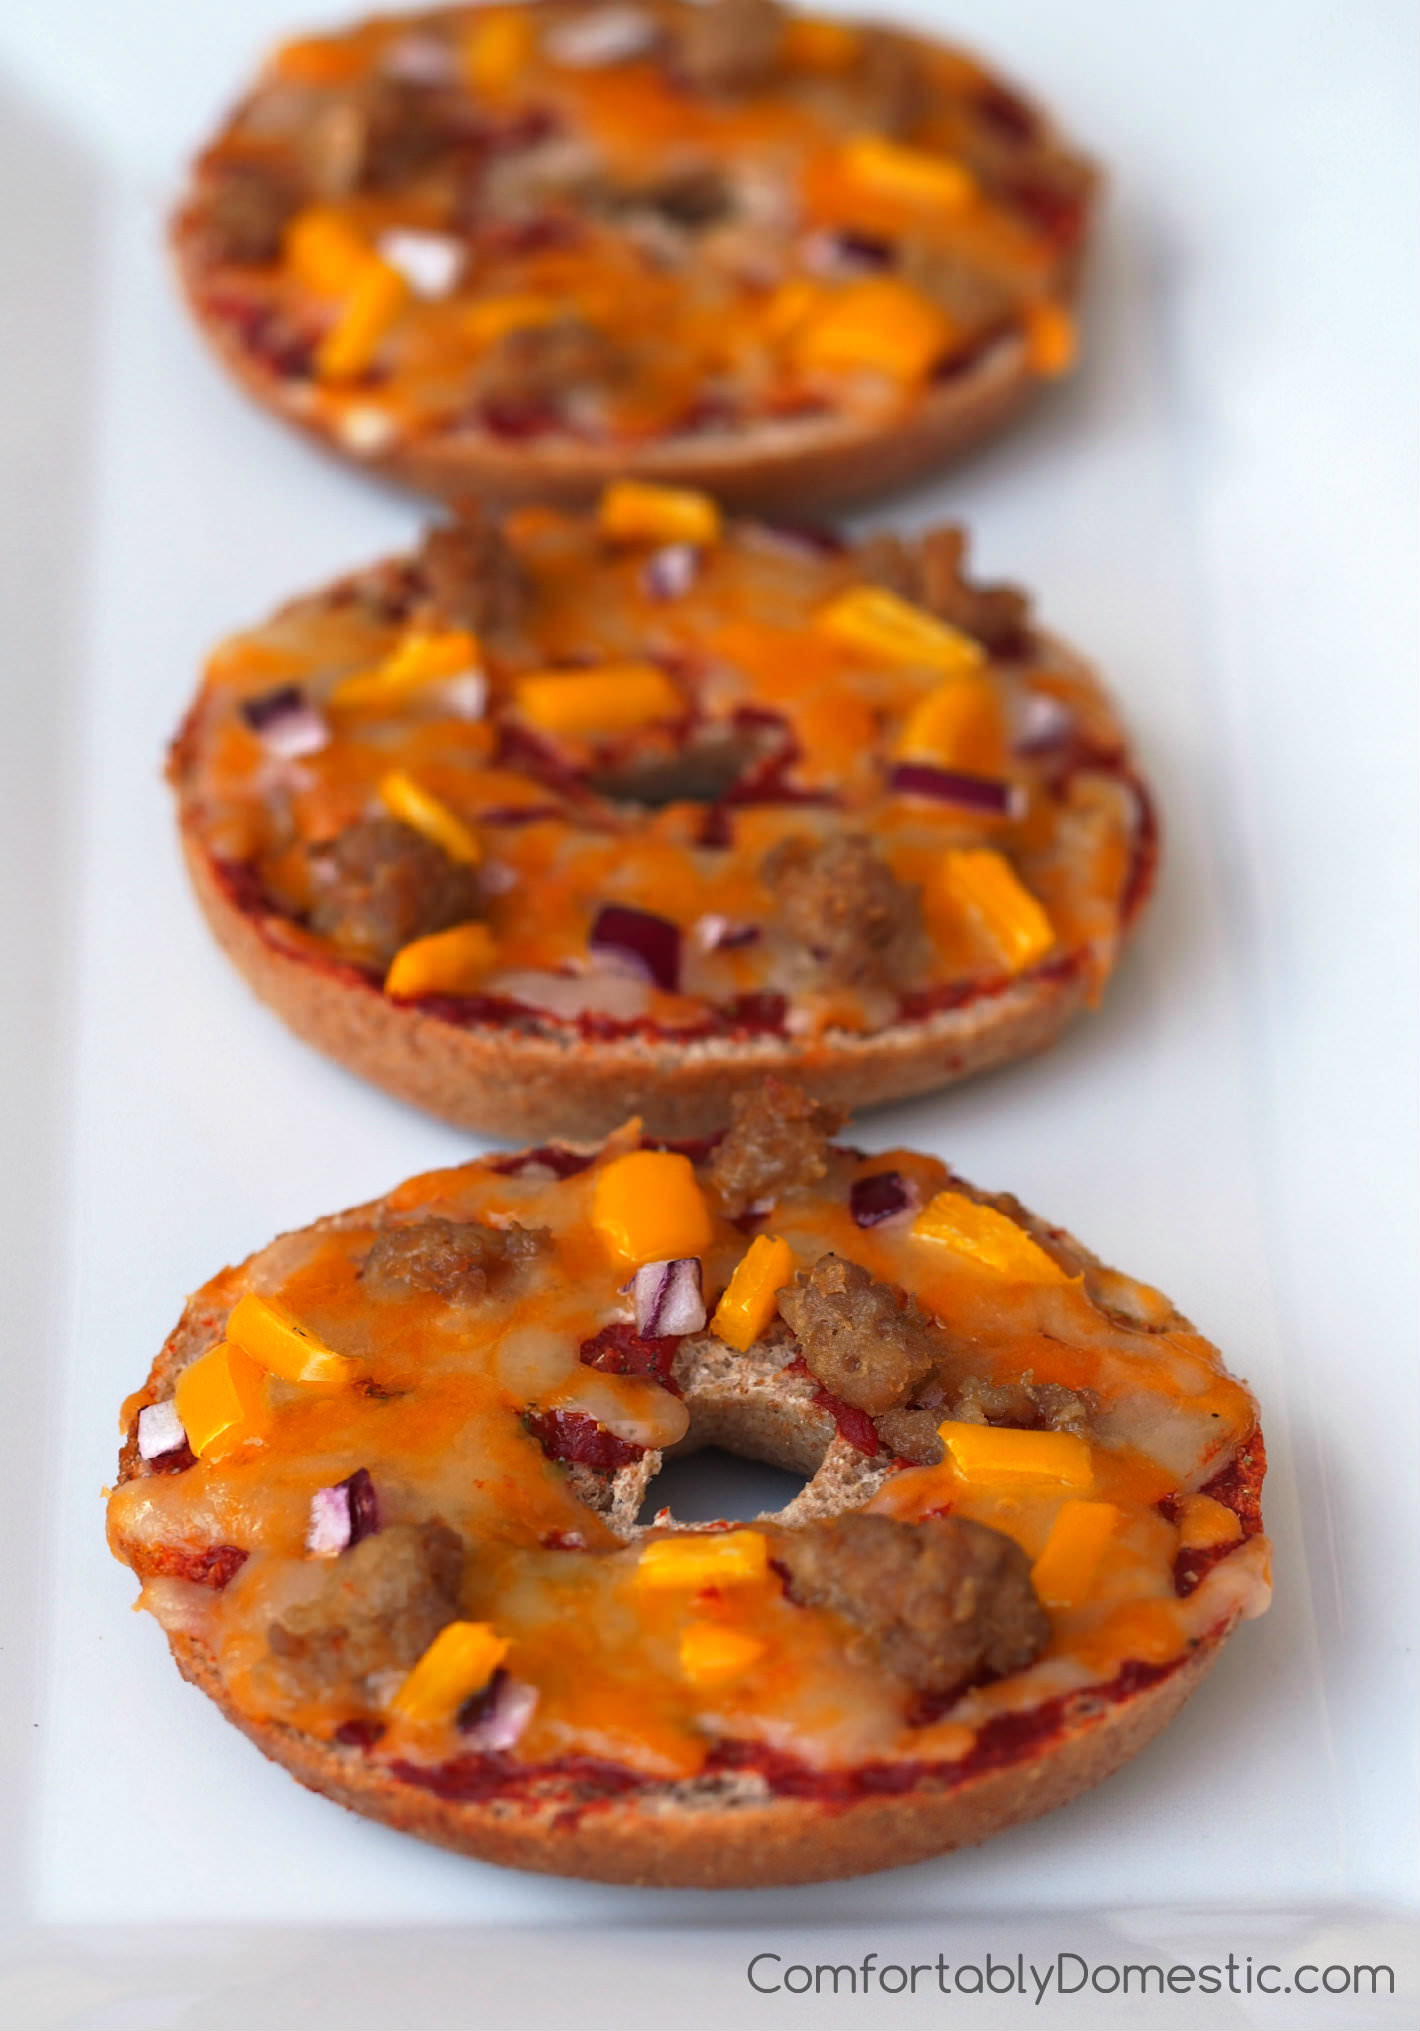 Copy Cat Bagel Bites - Whole grain bagels topped with wholesome toppings like cheddar-jack cheese, lean turkey sausage, and a mix of vegetables for a fun and balanced lunch. Bagel Bites may also be assembled ahead and frozen for a quick after school snack. | ComfortablyDomestic.com